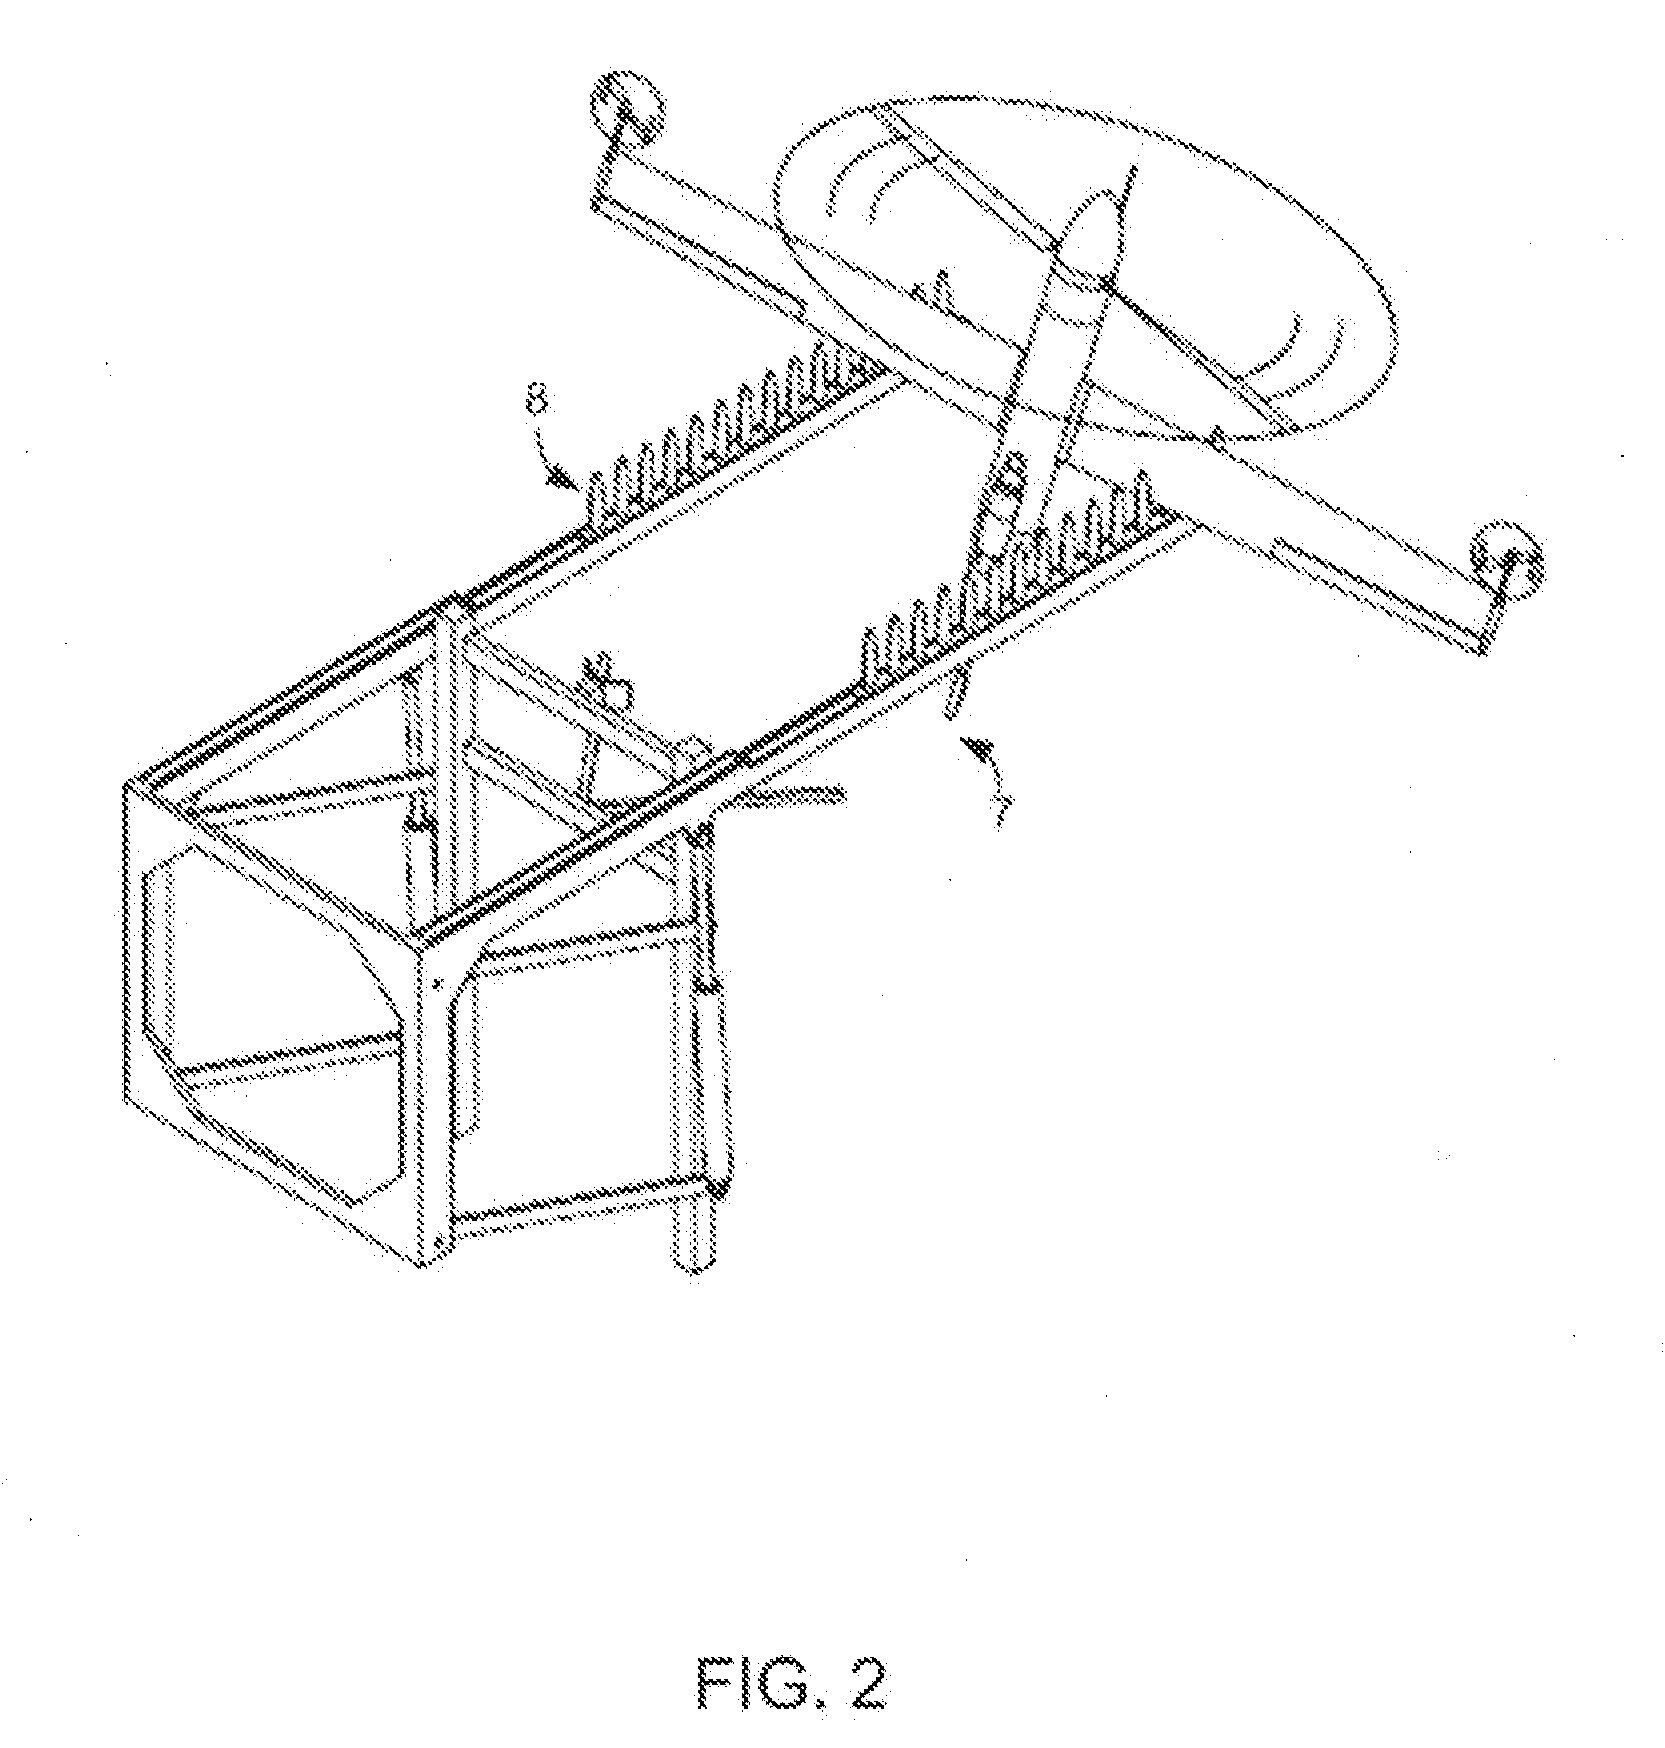 Method and apparatus for automated launch, retrieval, and servicing of a hovering aircraft